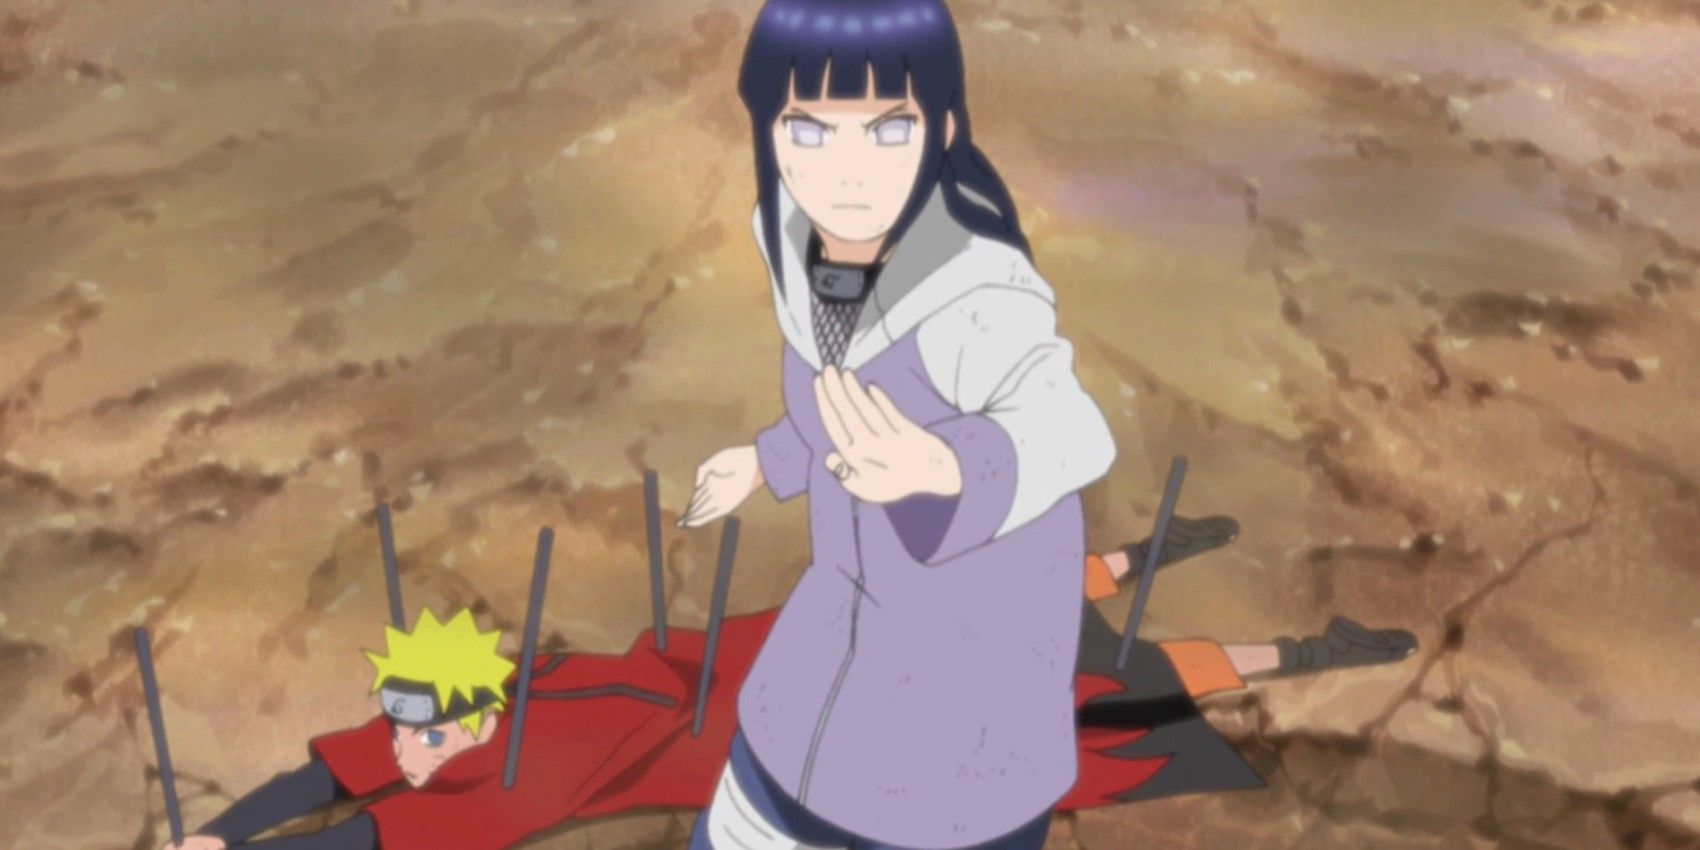 Naruto Characters, Ranked From Least To Most Likely To Win The Hunger Games